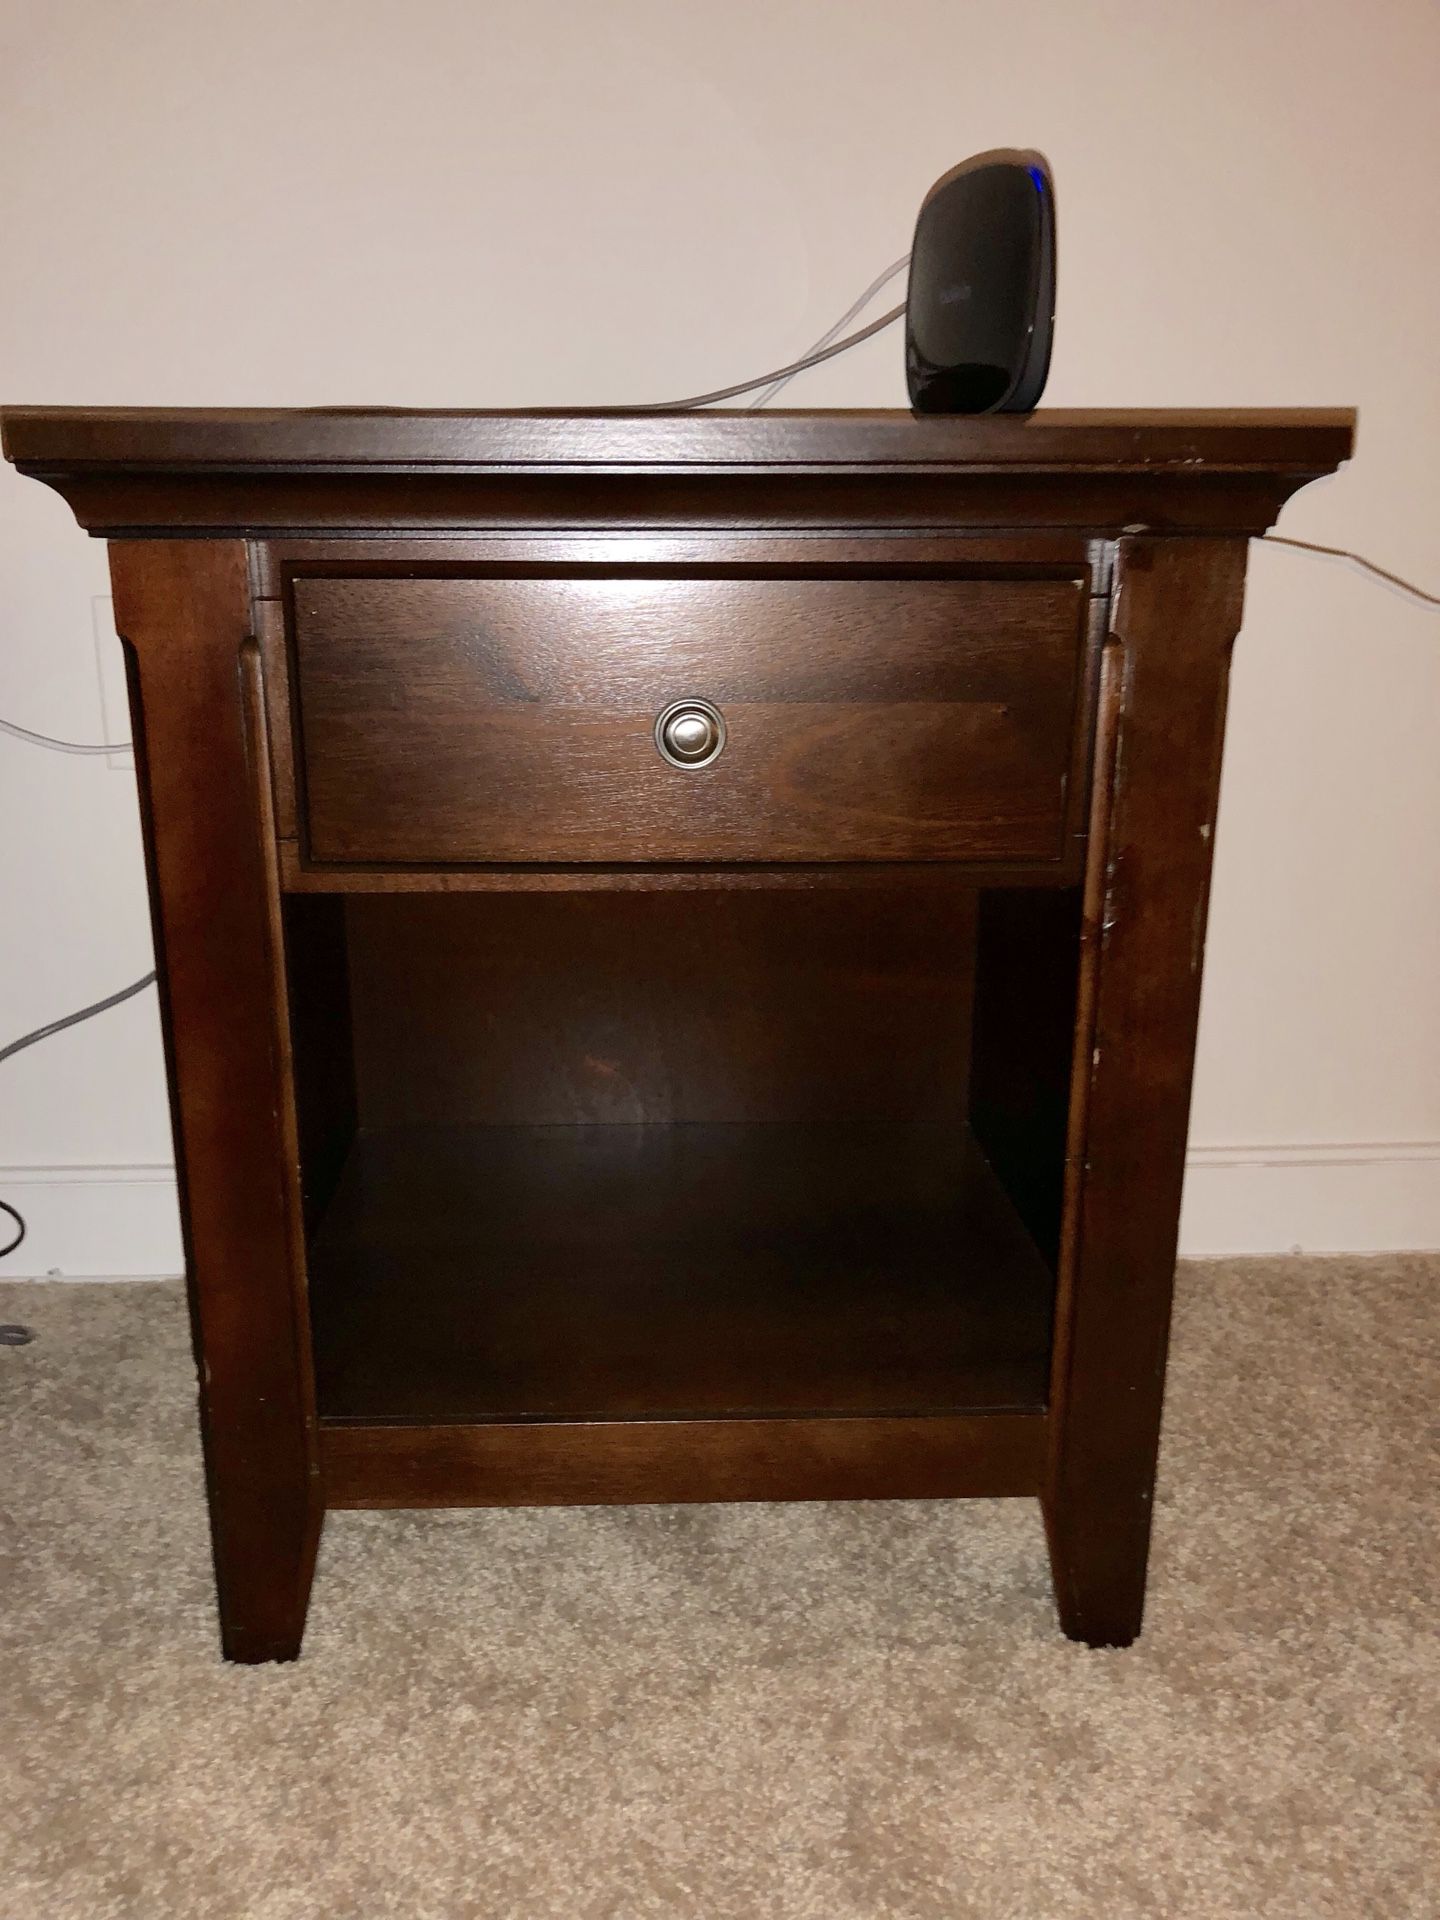 End table / bed side table